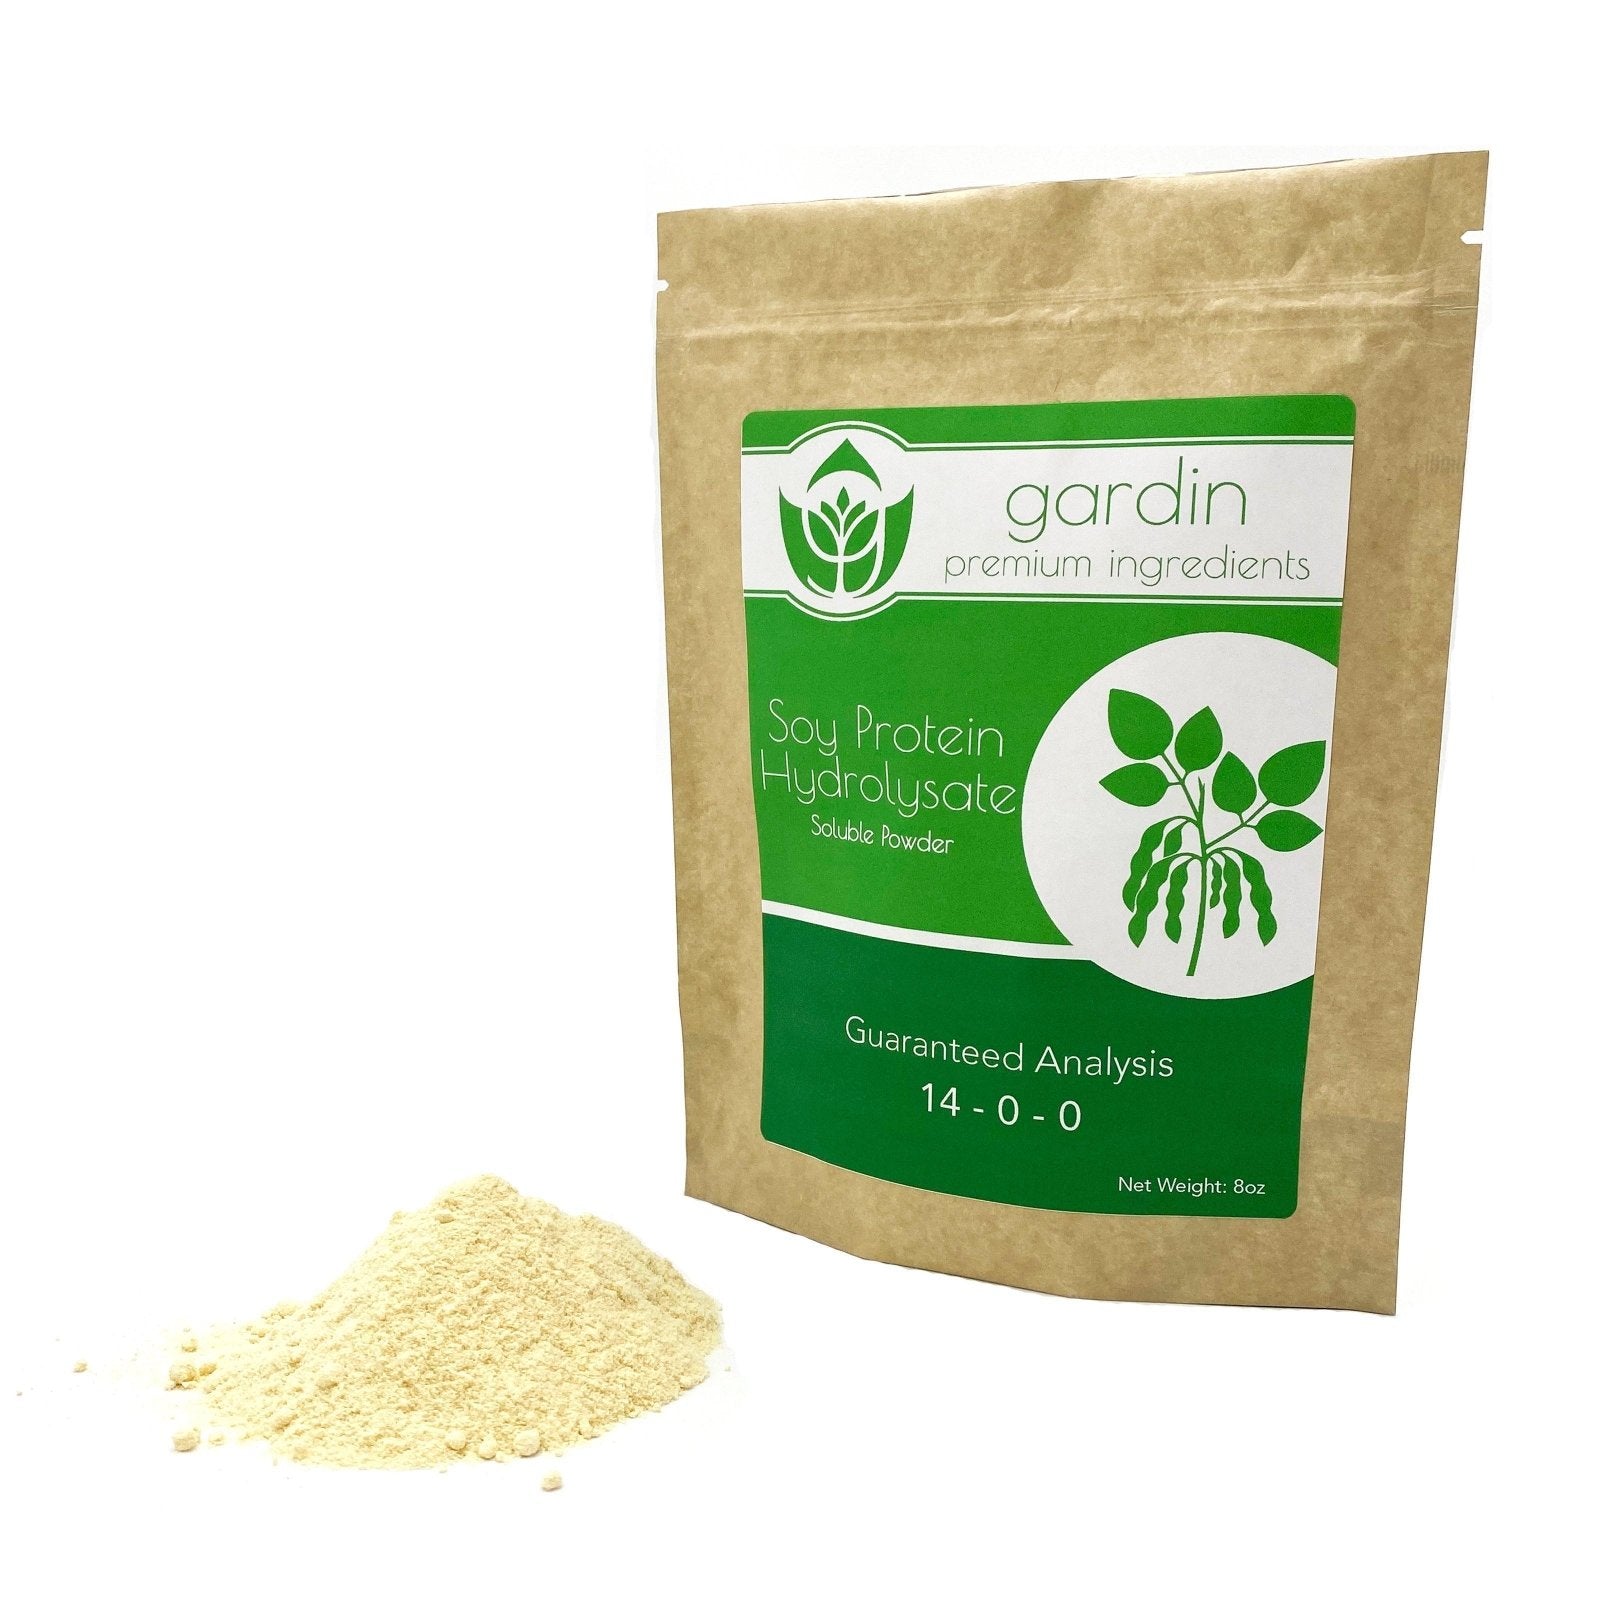 Nutrients, Additives & Solutions - Soy Protein Hydrolysate - Gardin Warehouse